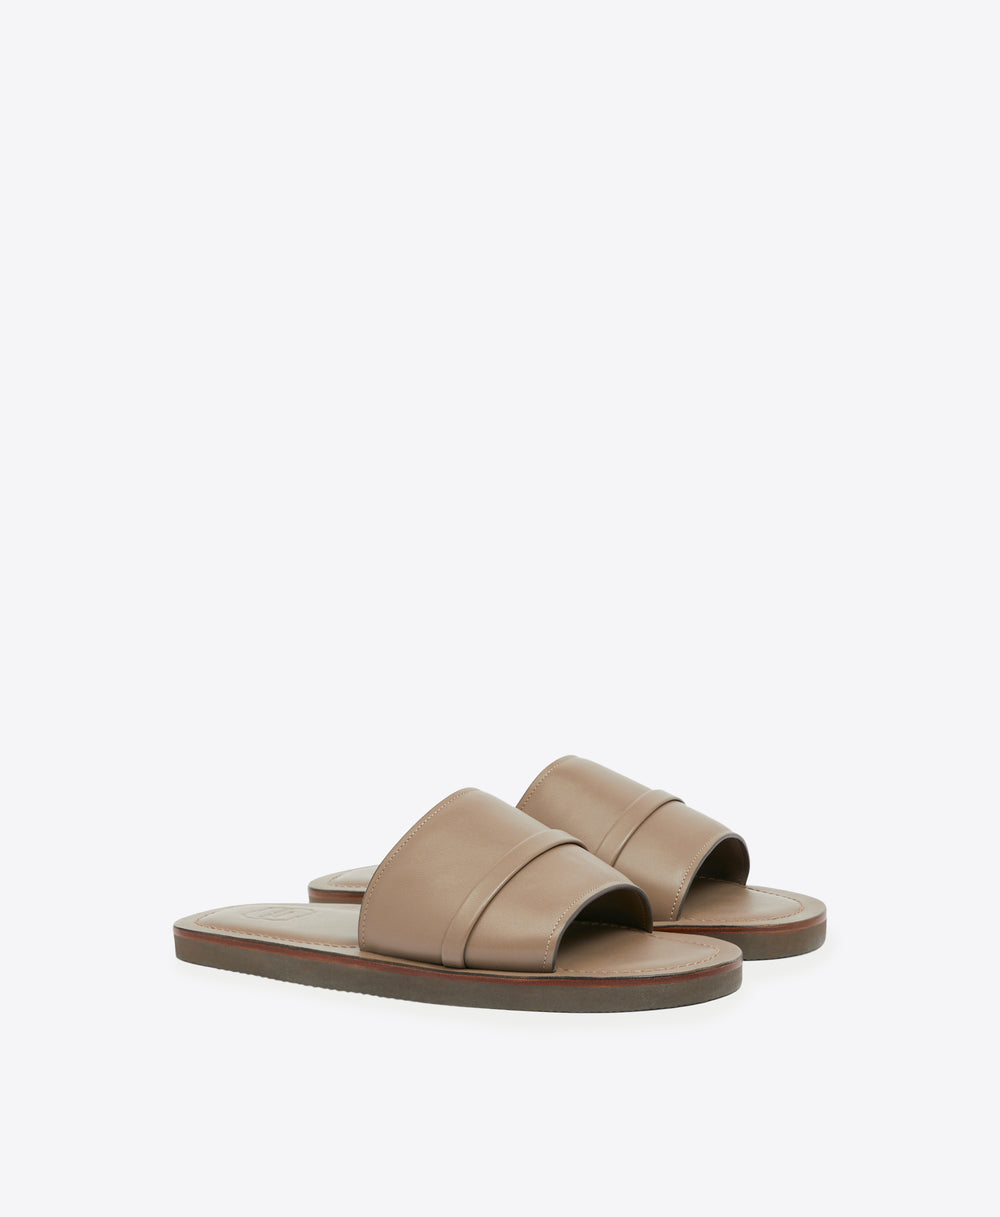 Men's Taupe Leather Slides  Malone Souliers